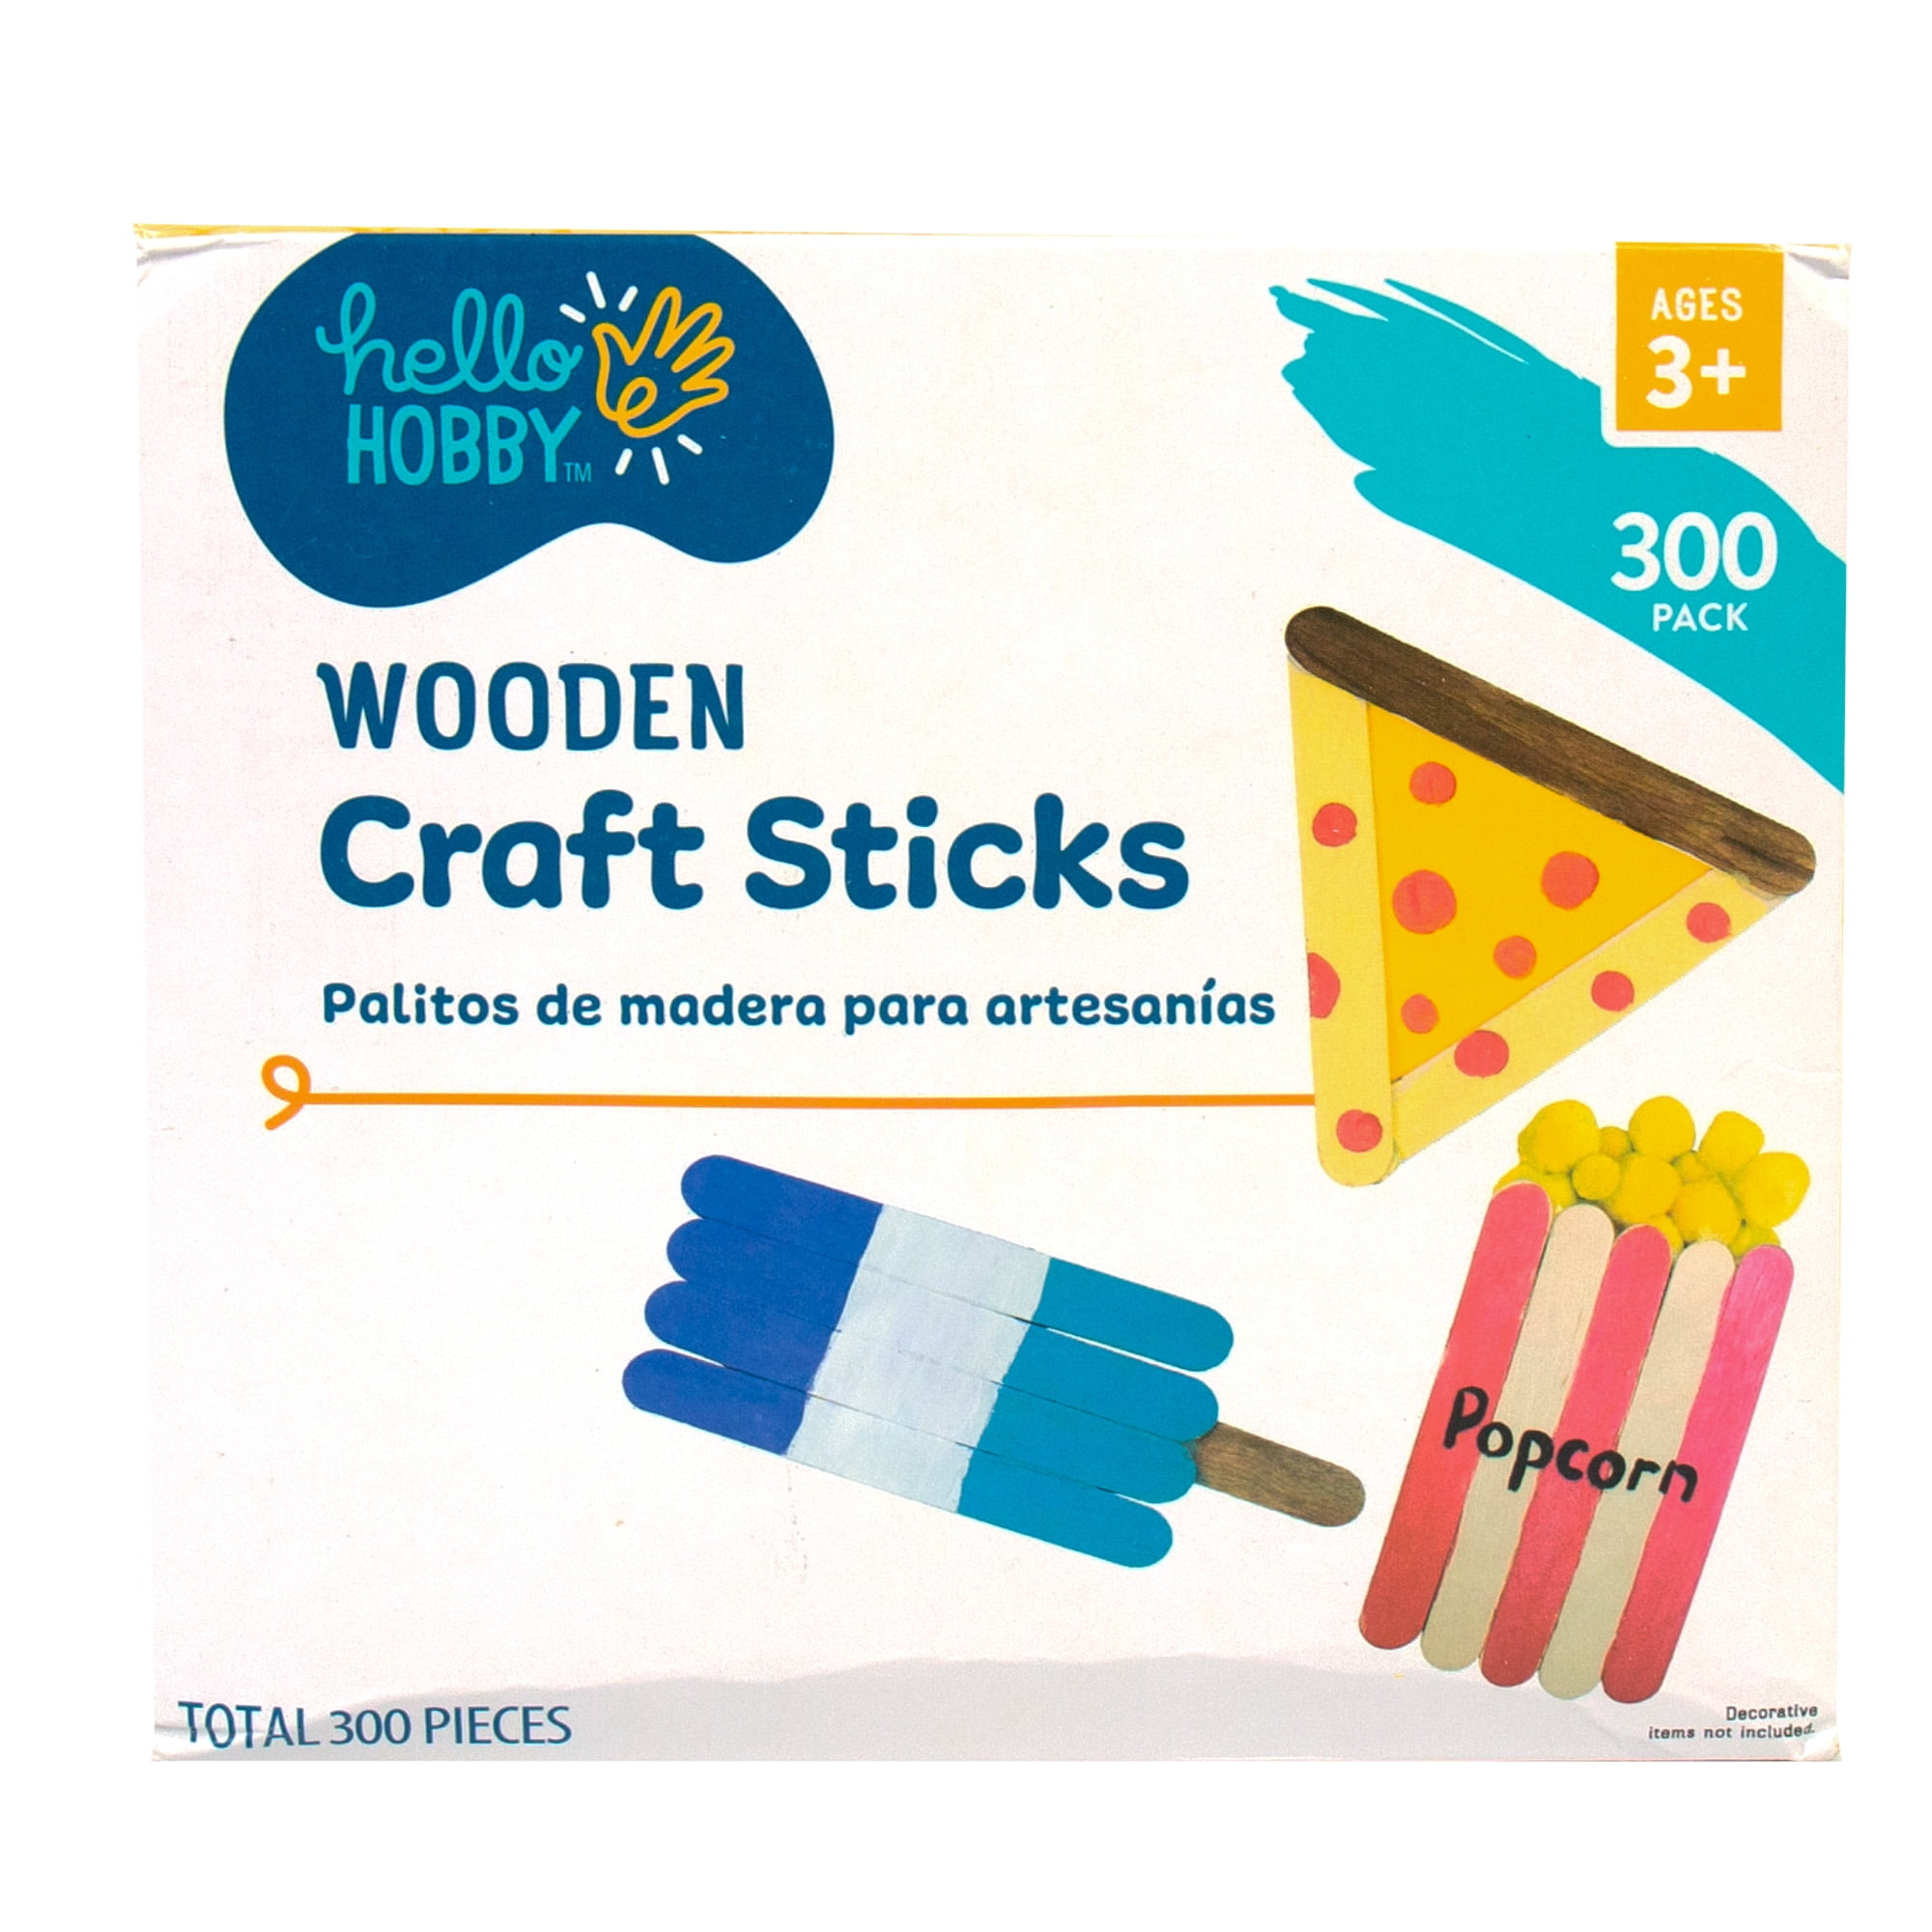 Colorations® Large Colored Wood Craft Sticks - 500 Pieces